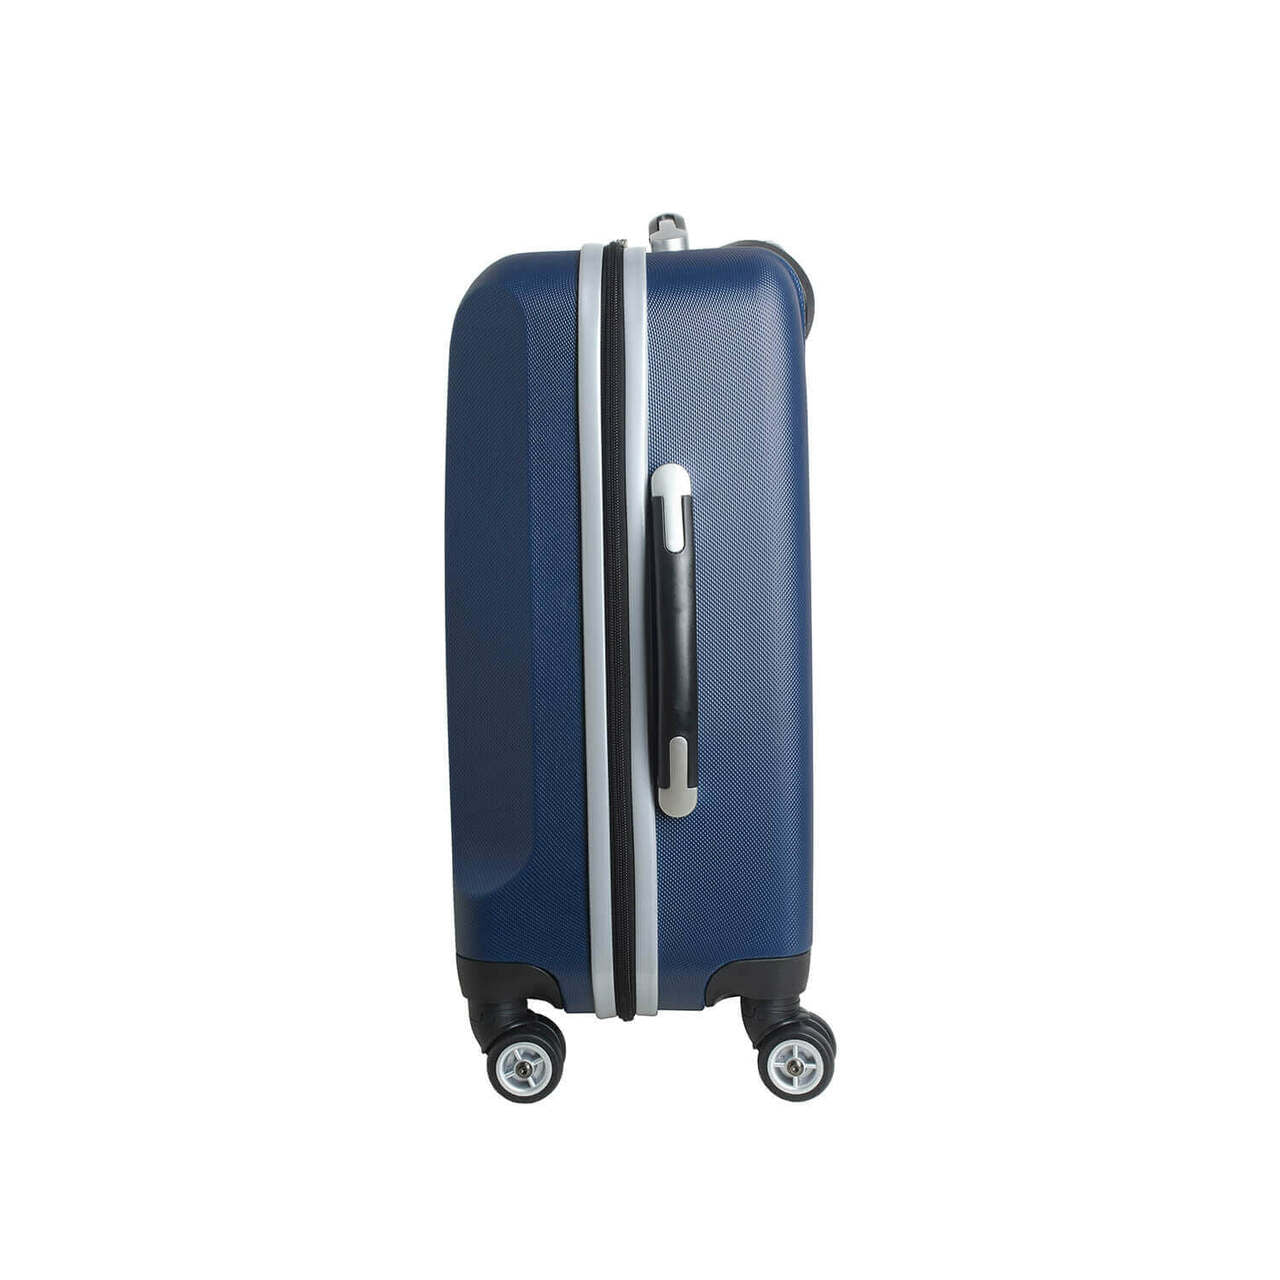 Personalized Initial Name letter "E" 20 inches Carry on Hardcase Spinner Luggage by Mojo in NAVY